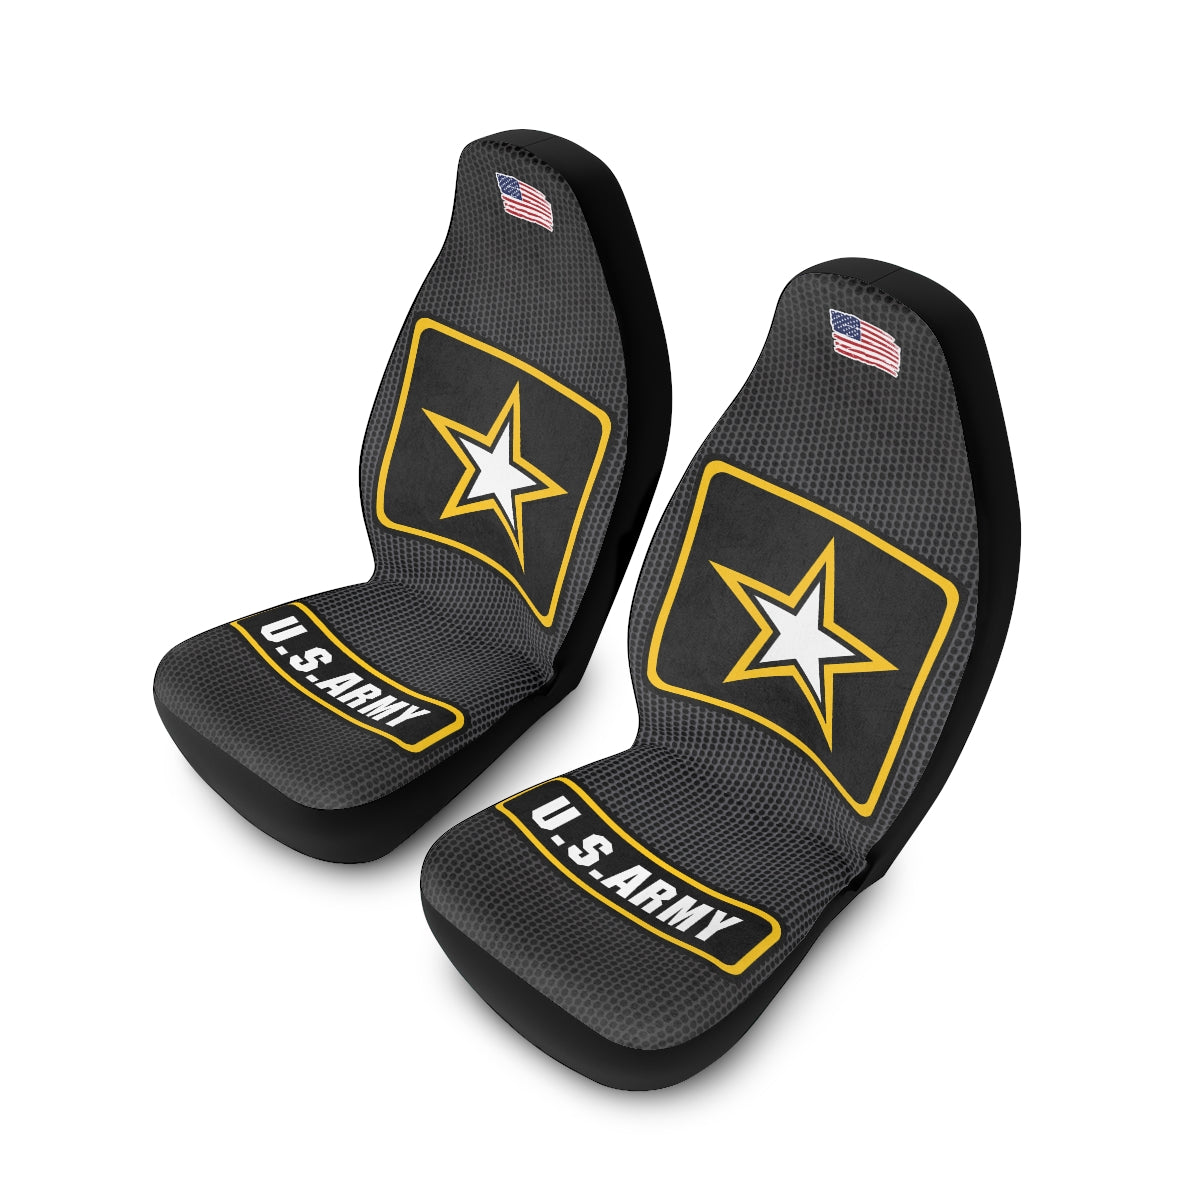 U.S. Army (logo 2) Black Polyester Car Seat Covers